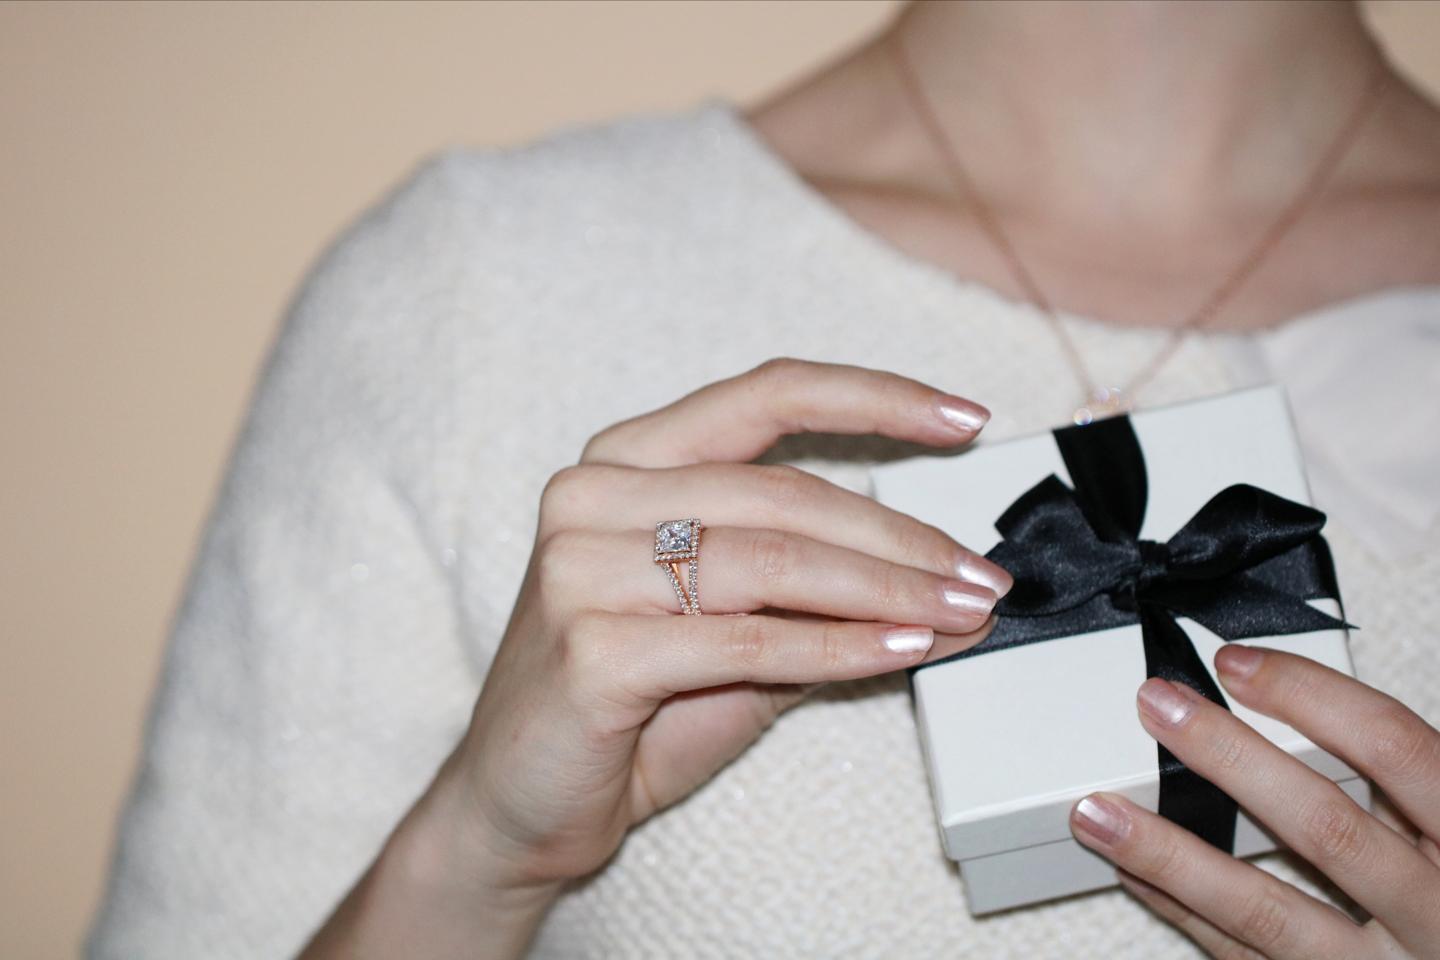 Should you buy both the engagement ring and the wedding ring at the same time?